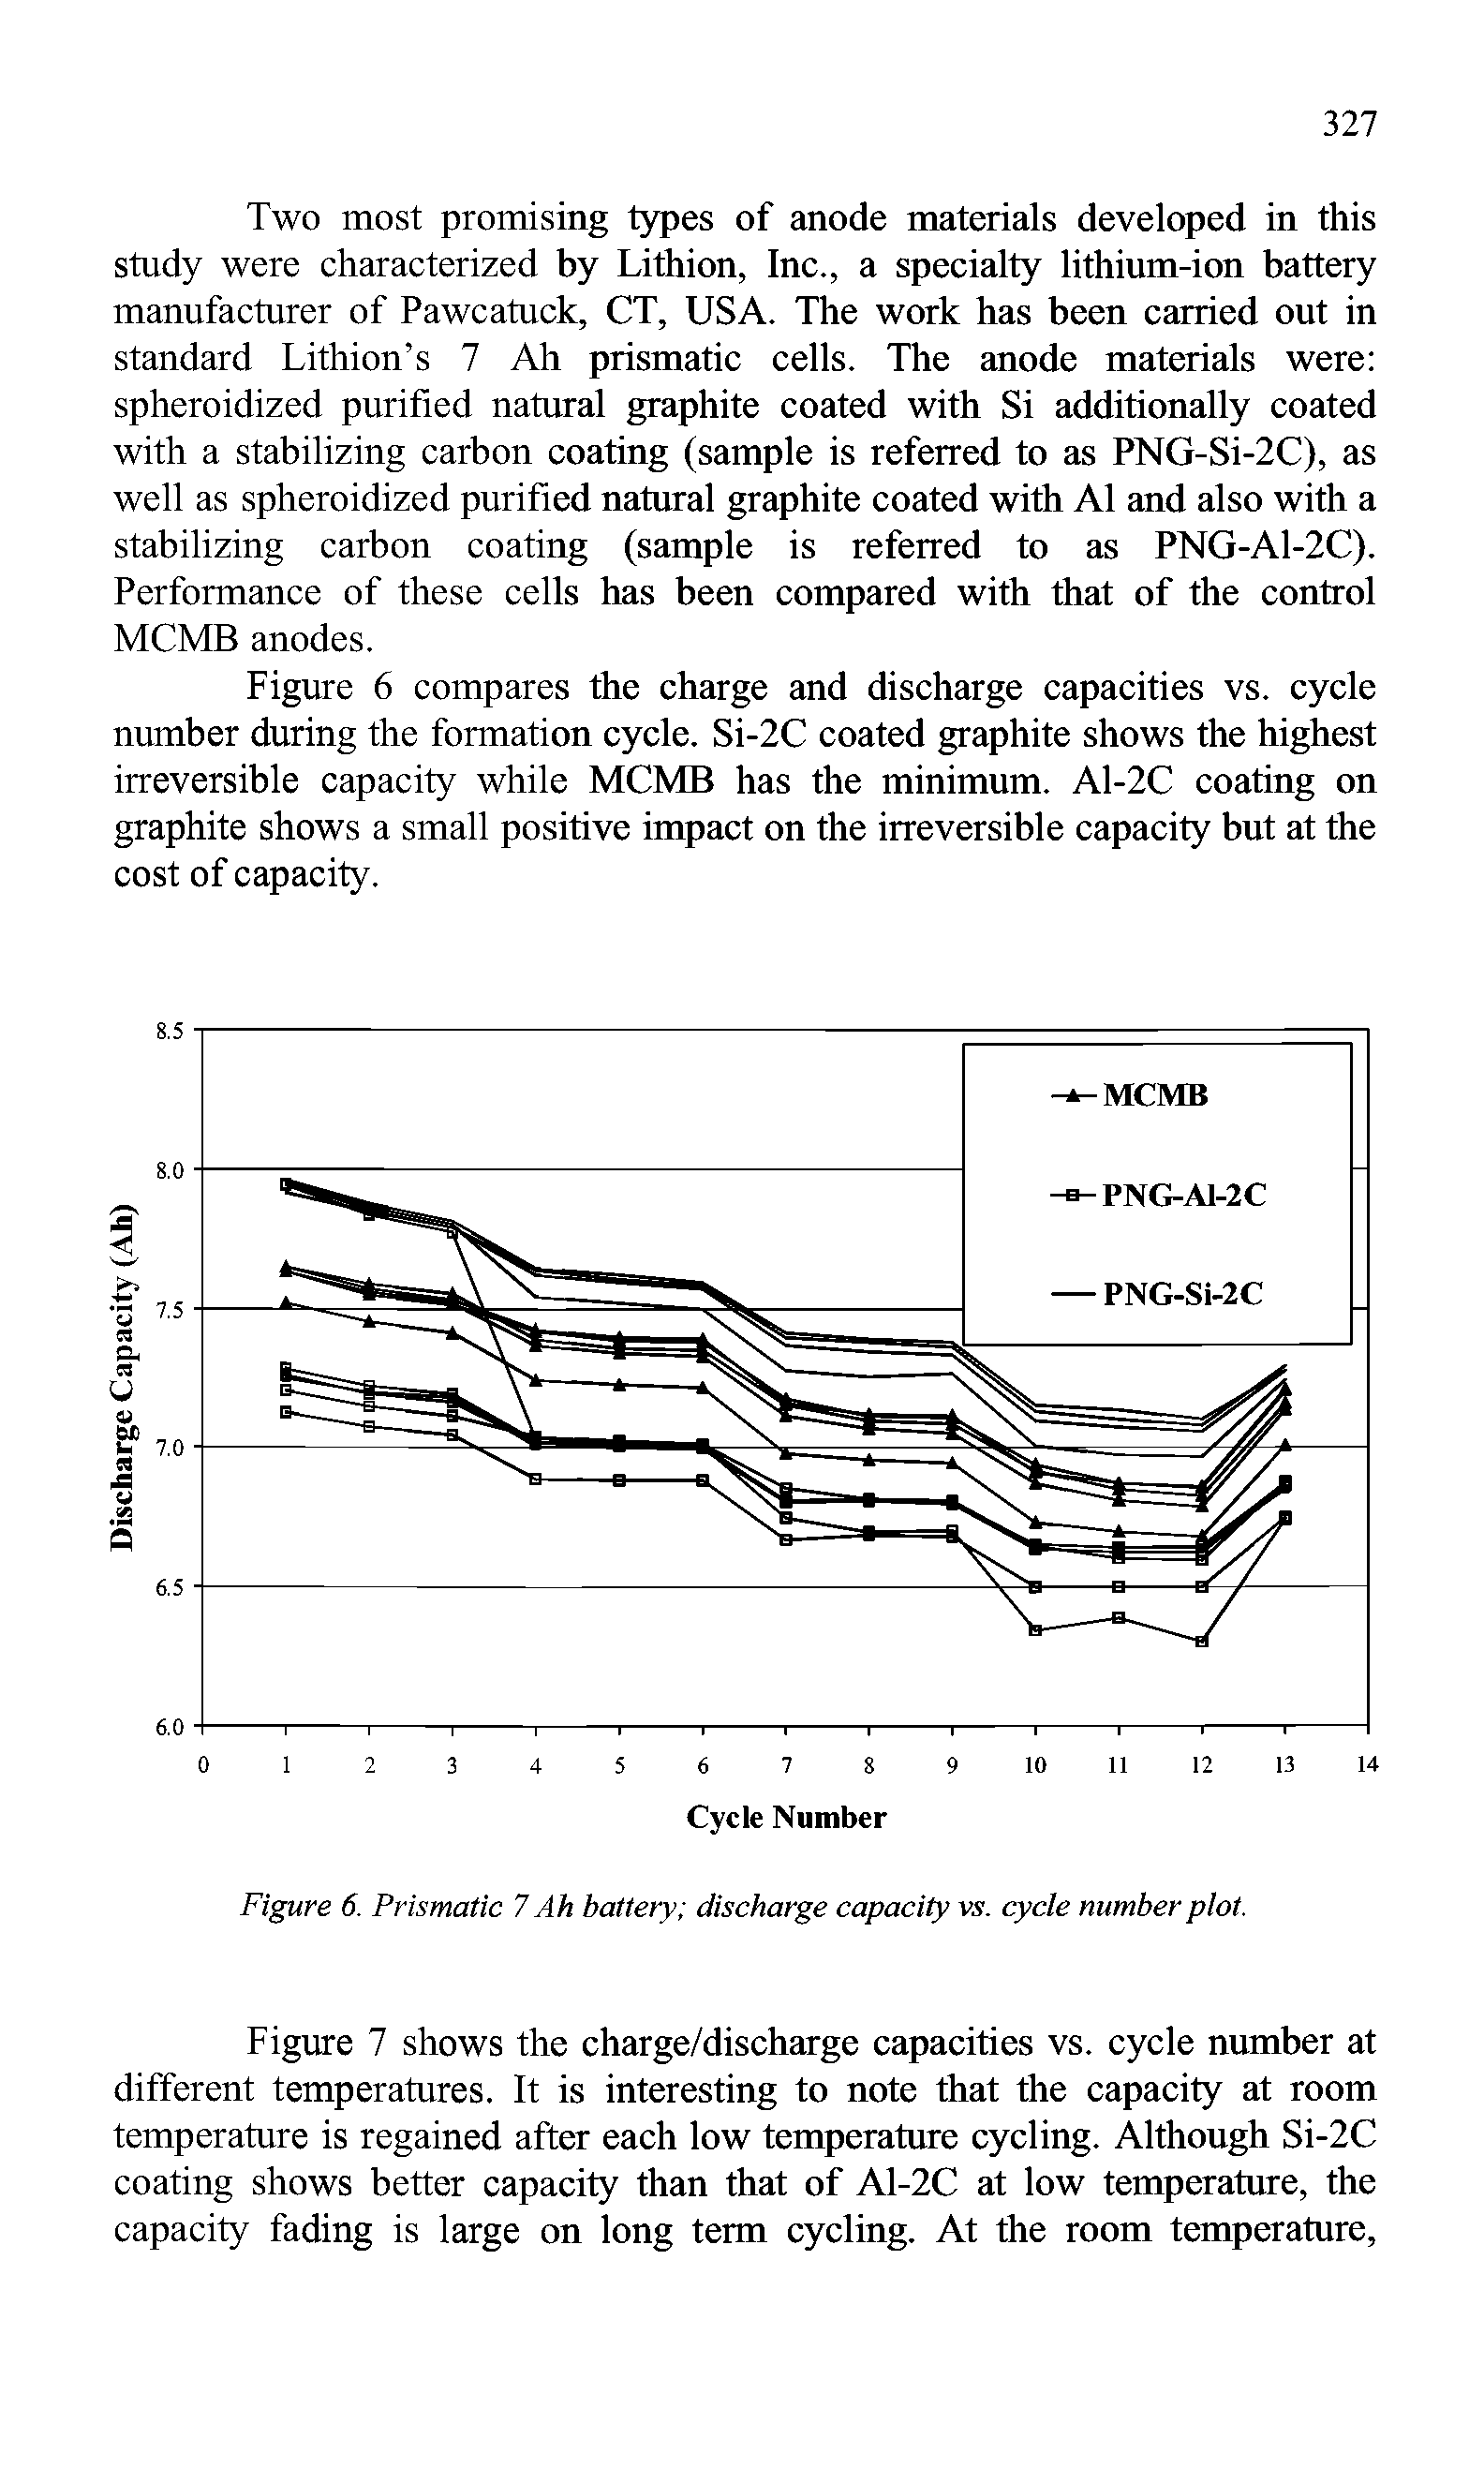 Figure 6. Prismatic 7 Ah battery discharge capacity vs. cycle number plot.